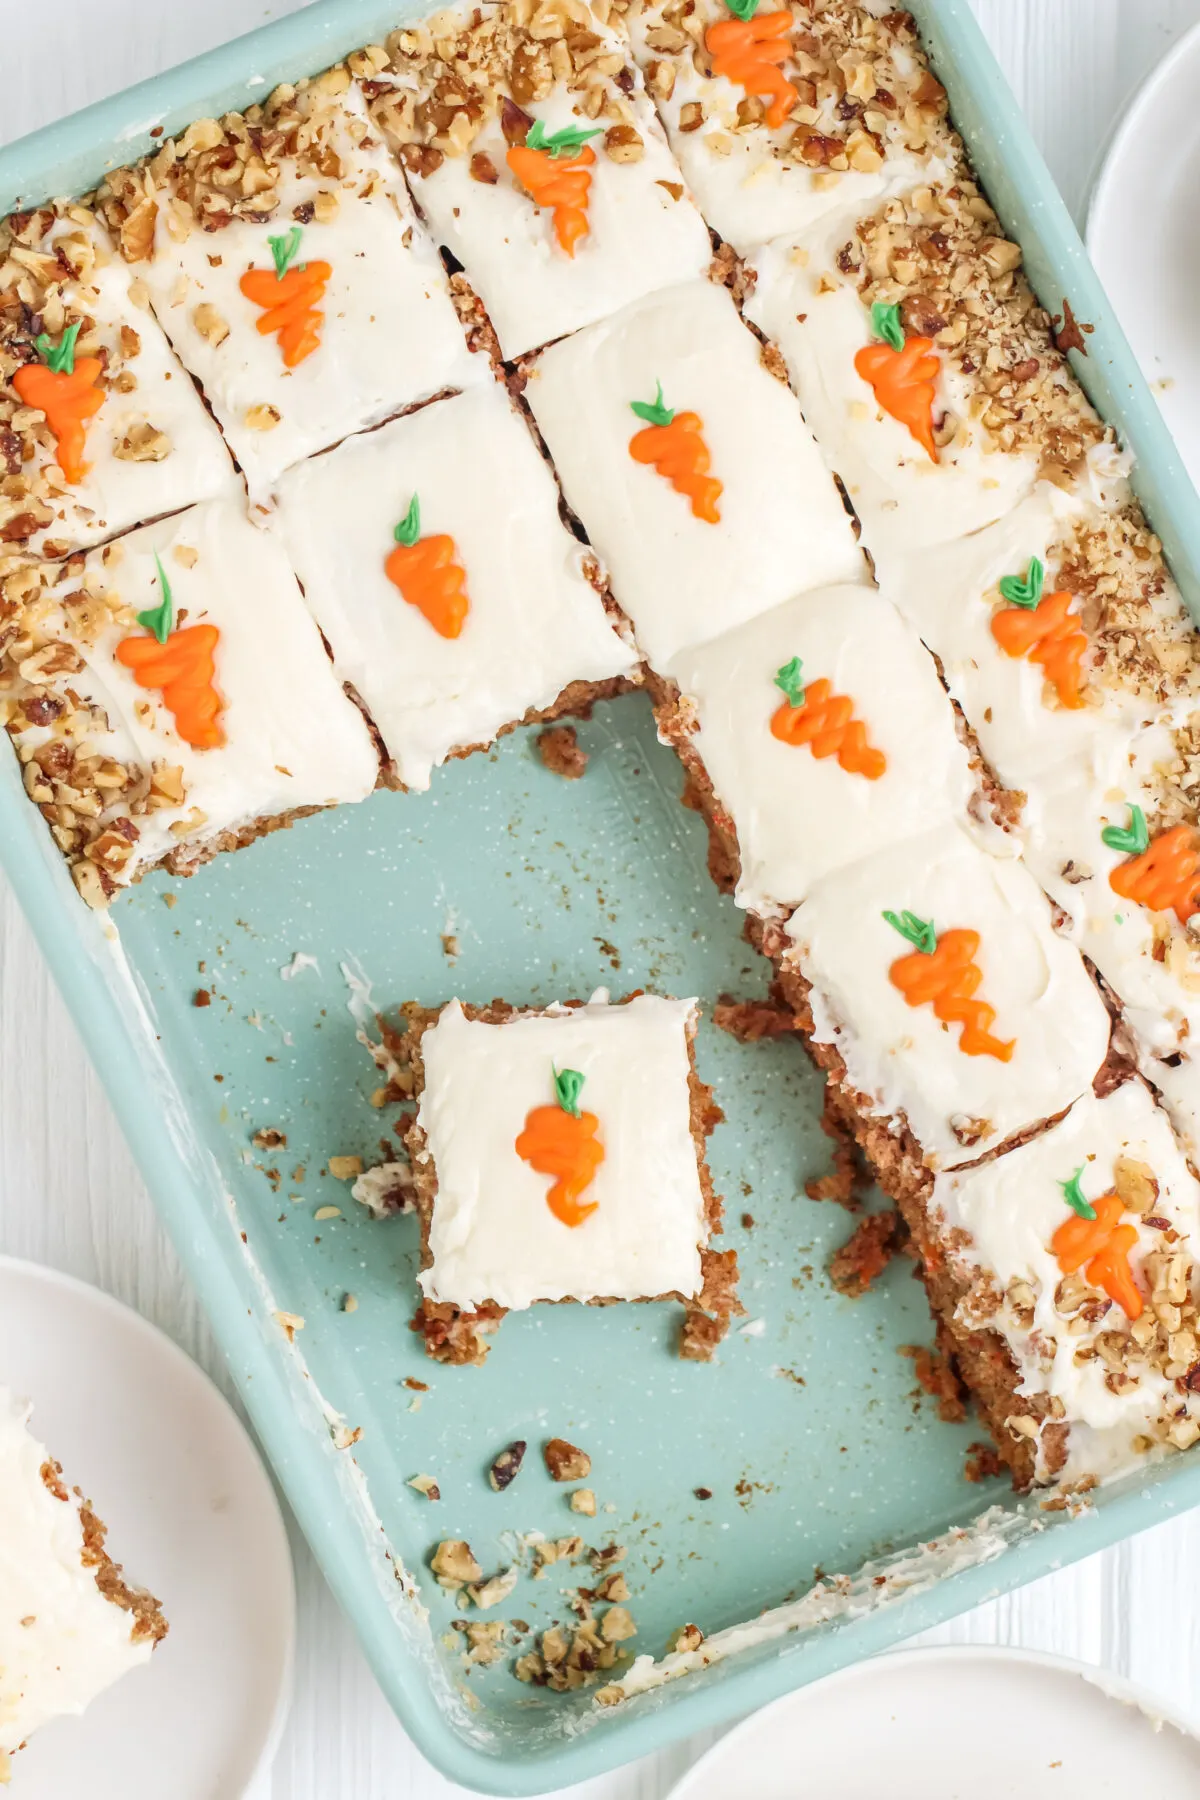 This carrot sheet cake recipe is easy to make, and looks great on a plate. It's moist, perfectly spiced, and not to mention, it's delicious!